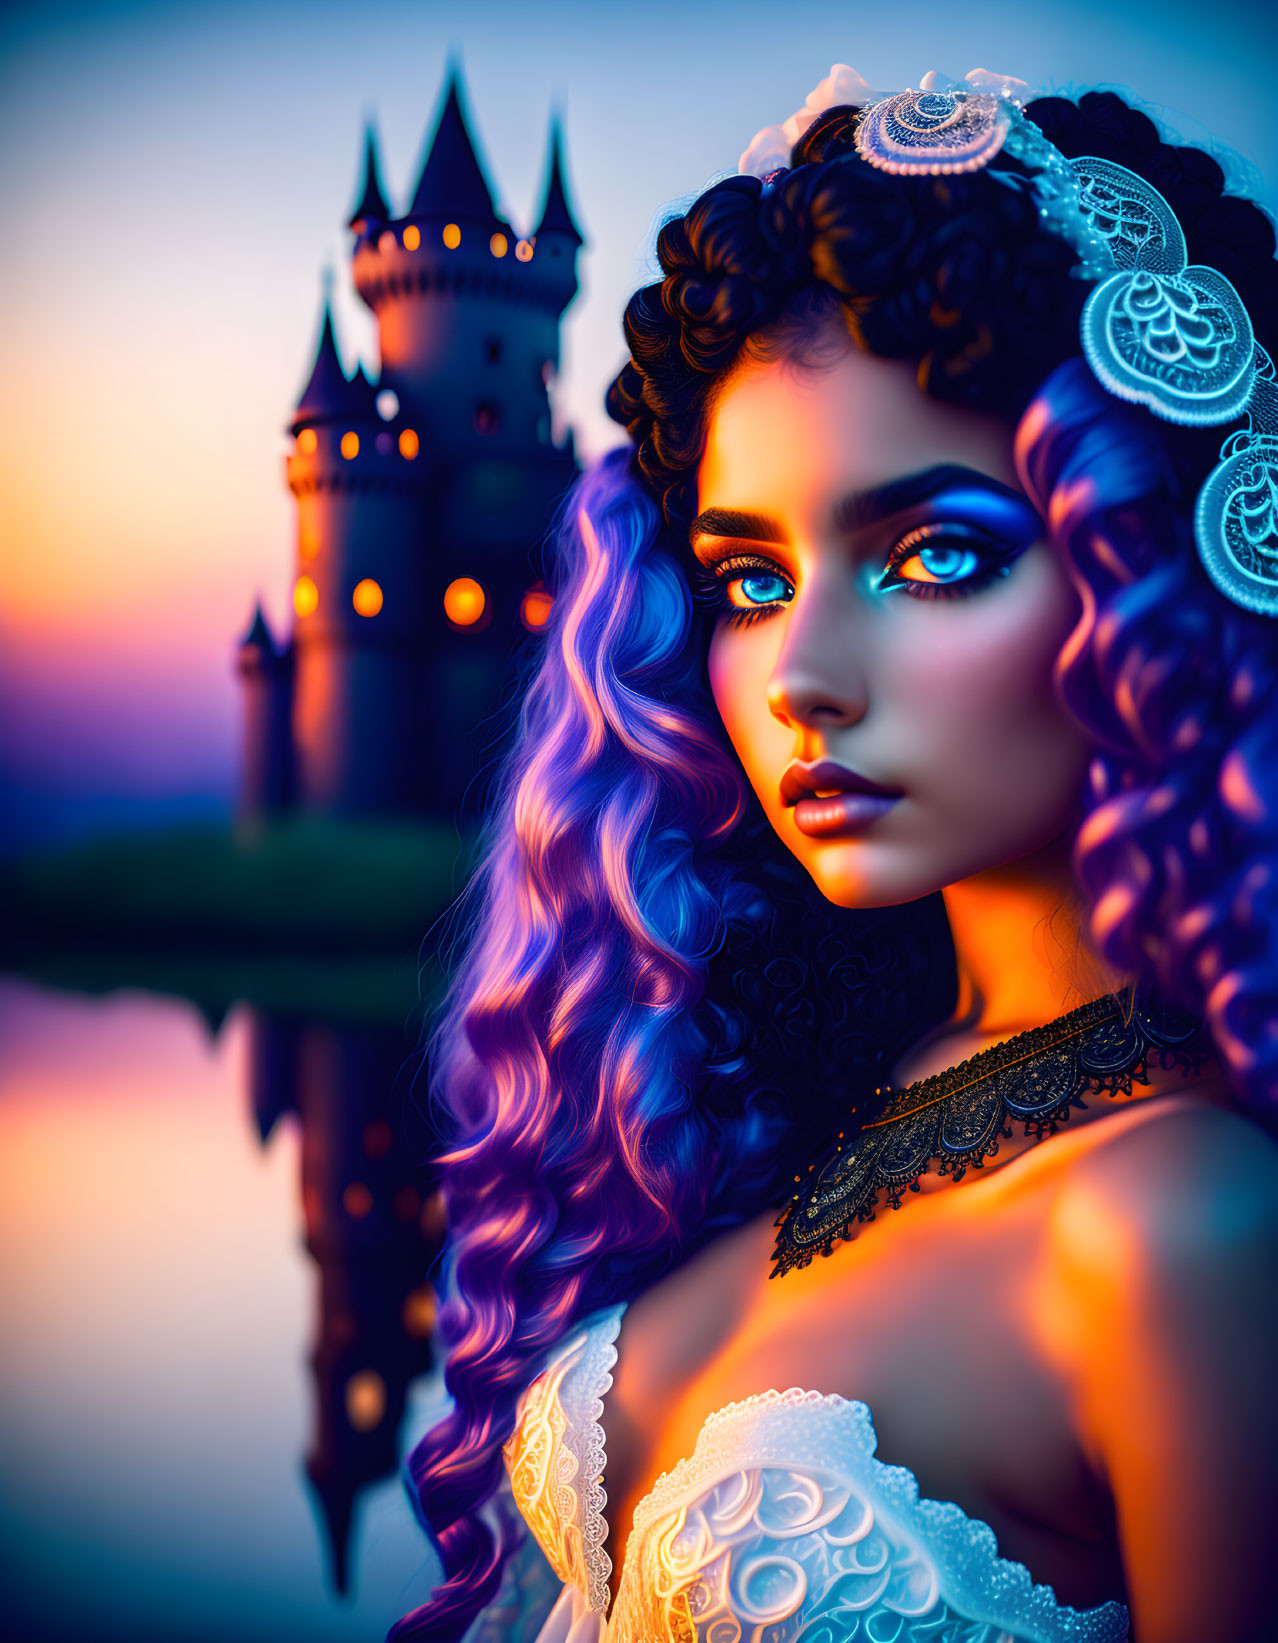 Digital Artwork: Woman with Blue Eyes and Hair, Sunset Scene with Castle Reflection